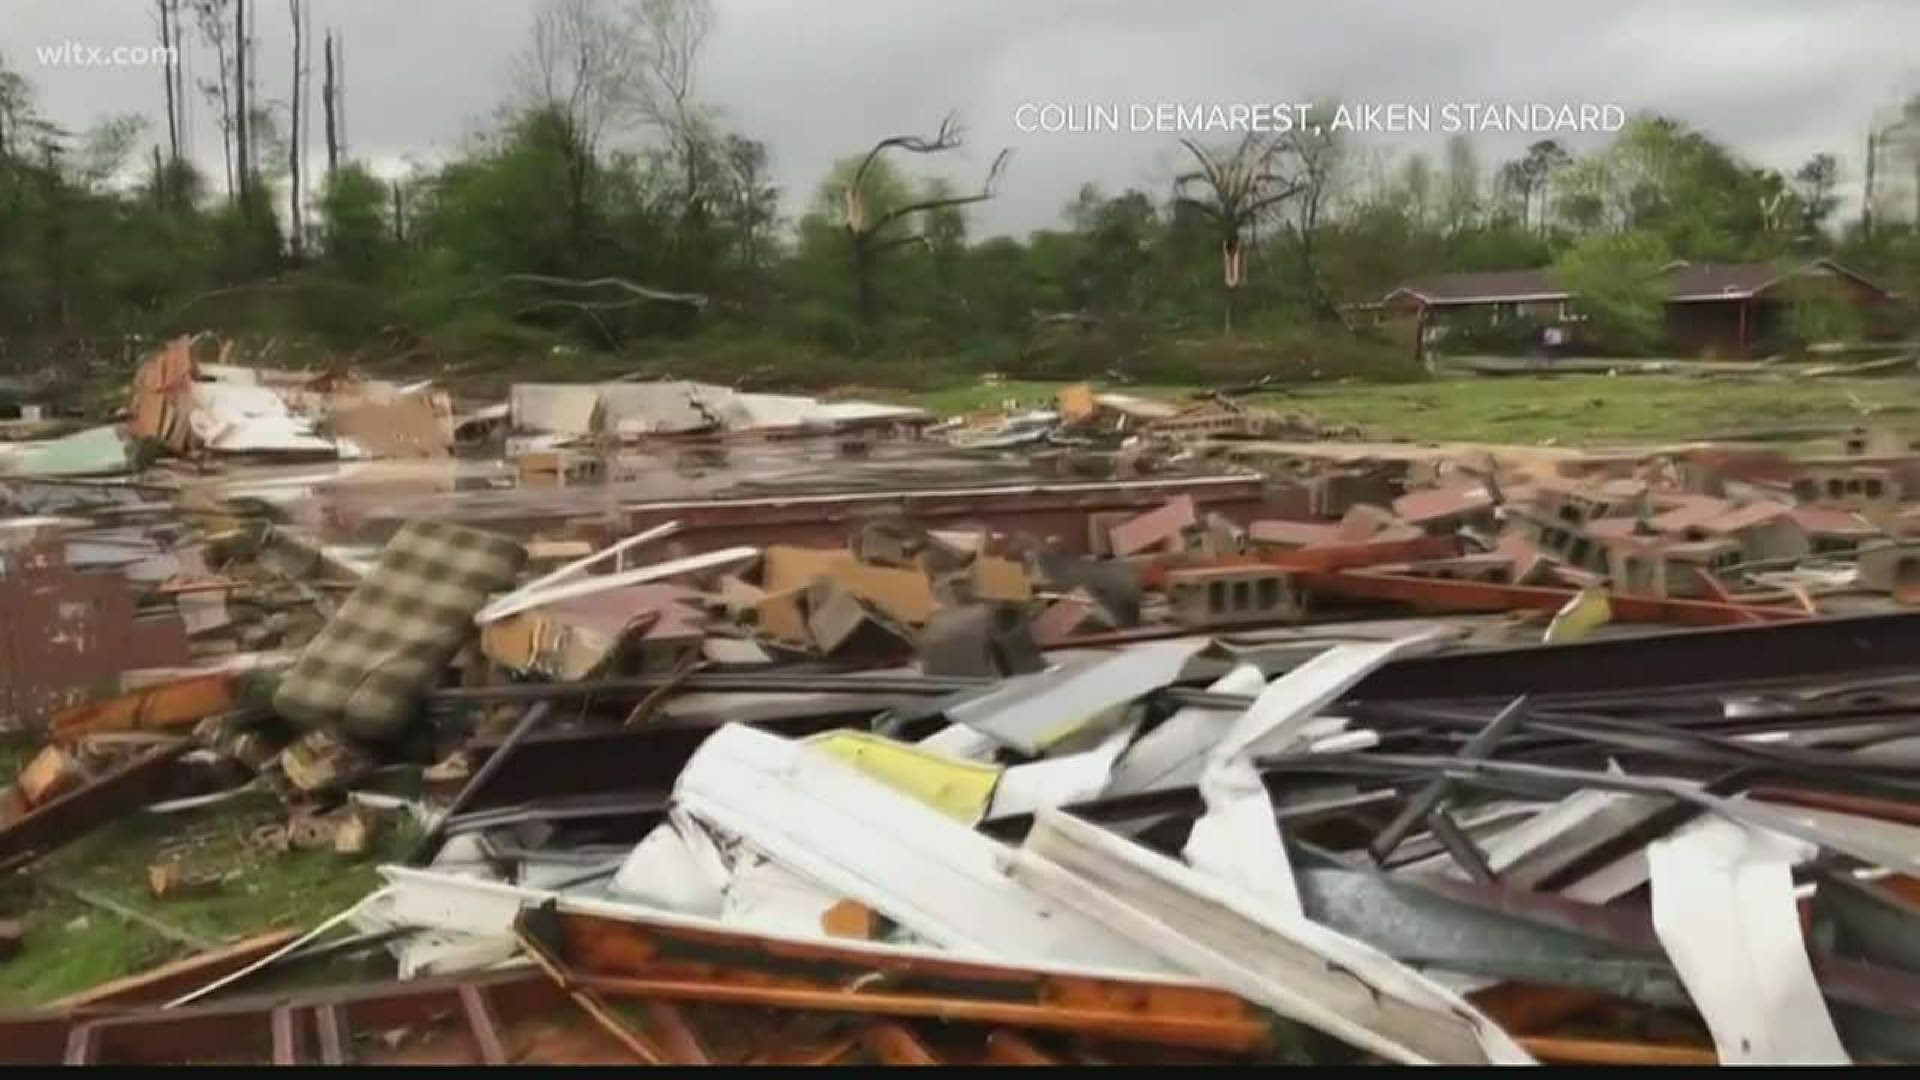 Tornadoes causes multiple deaths in South Carolina